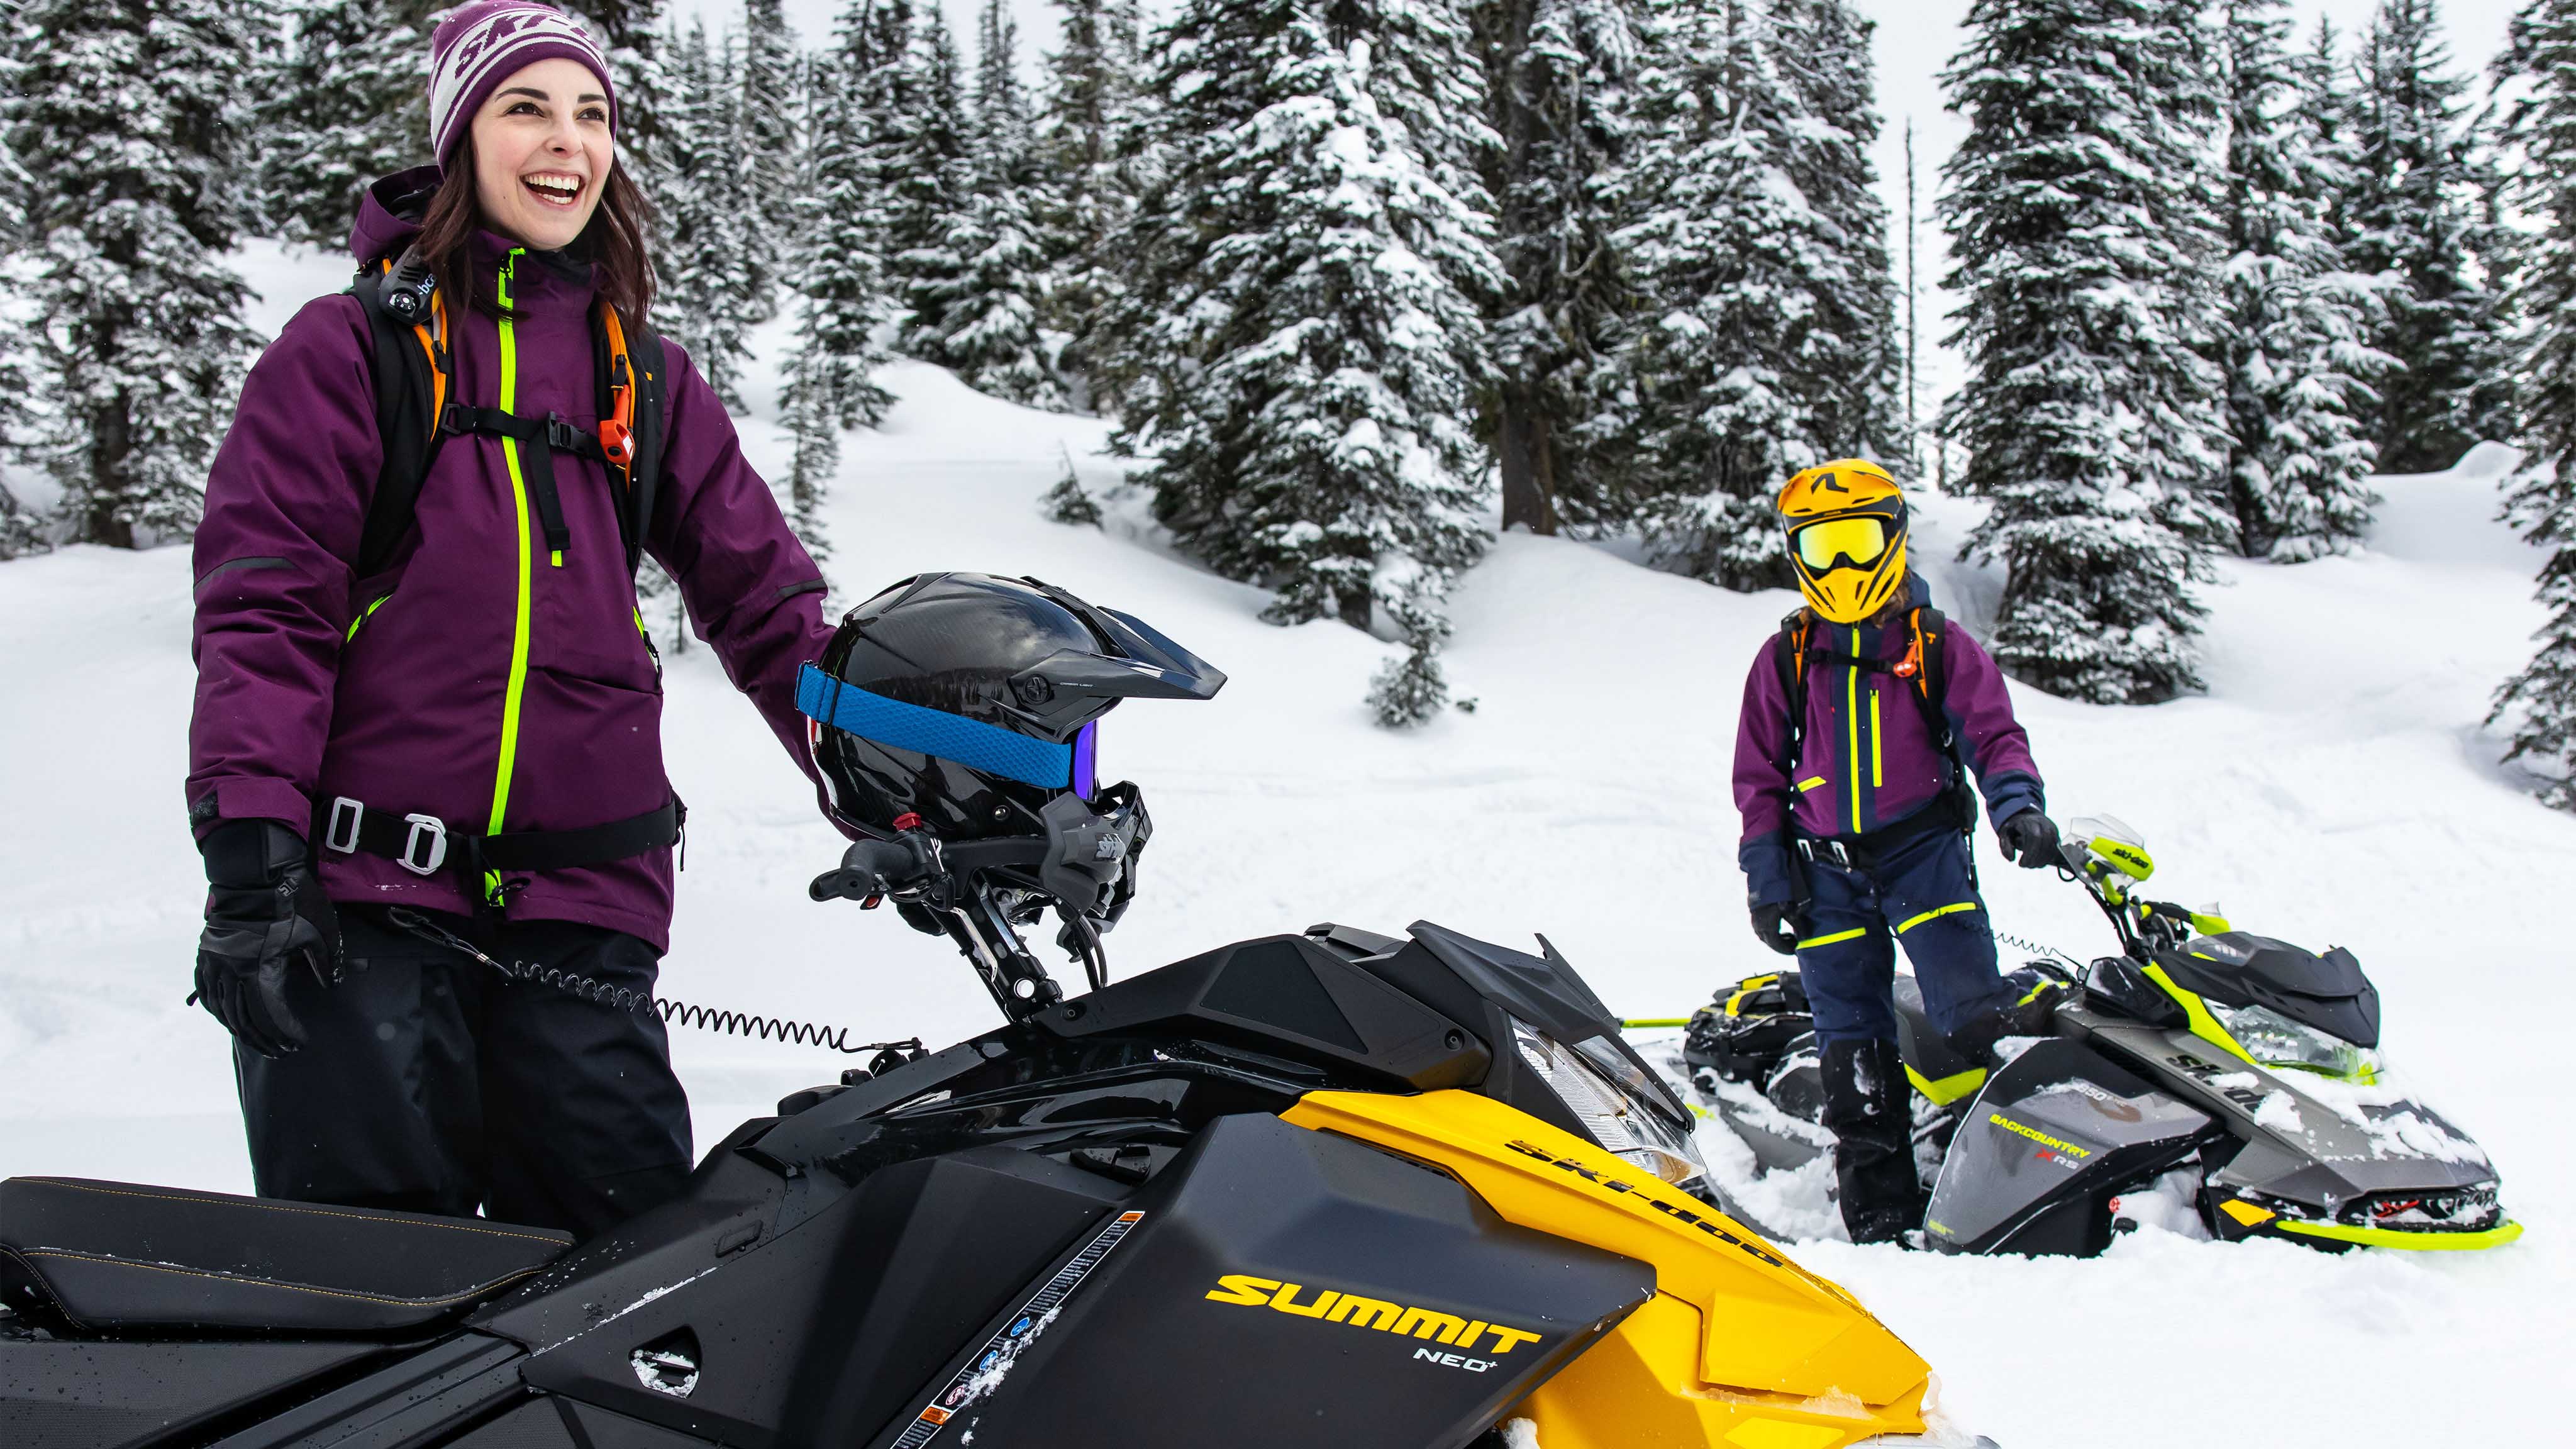 Two women standing on their Ski-Doo sleds